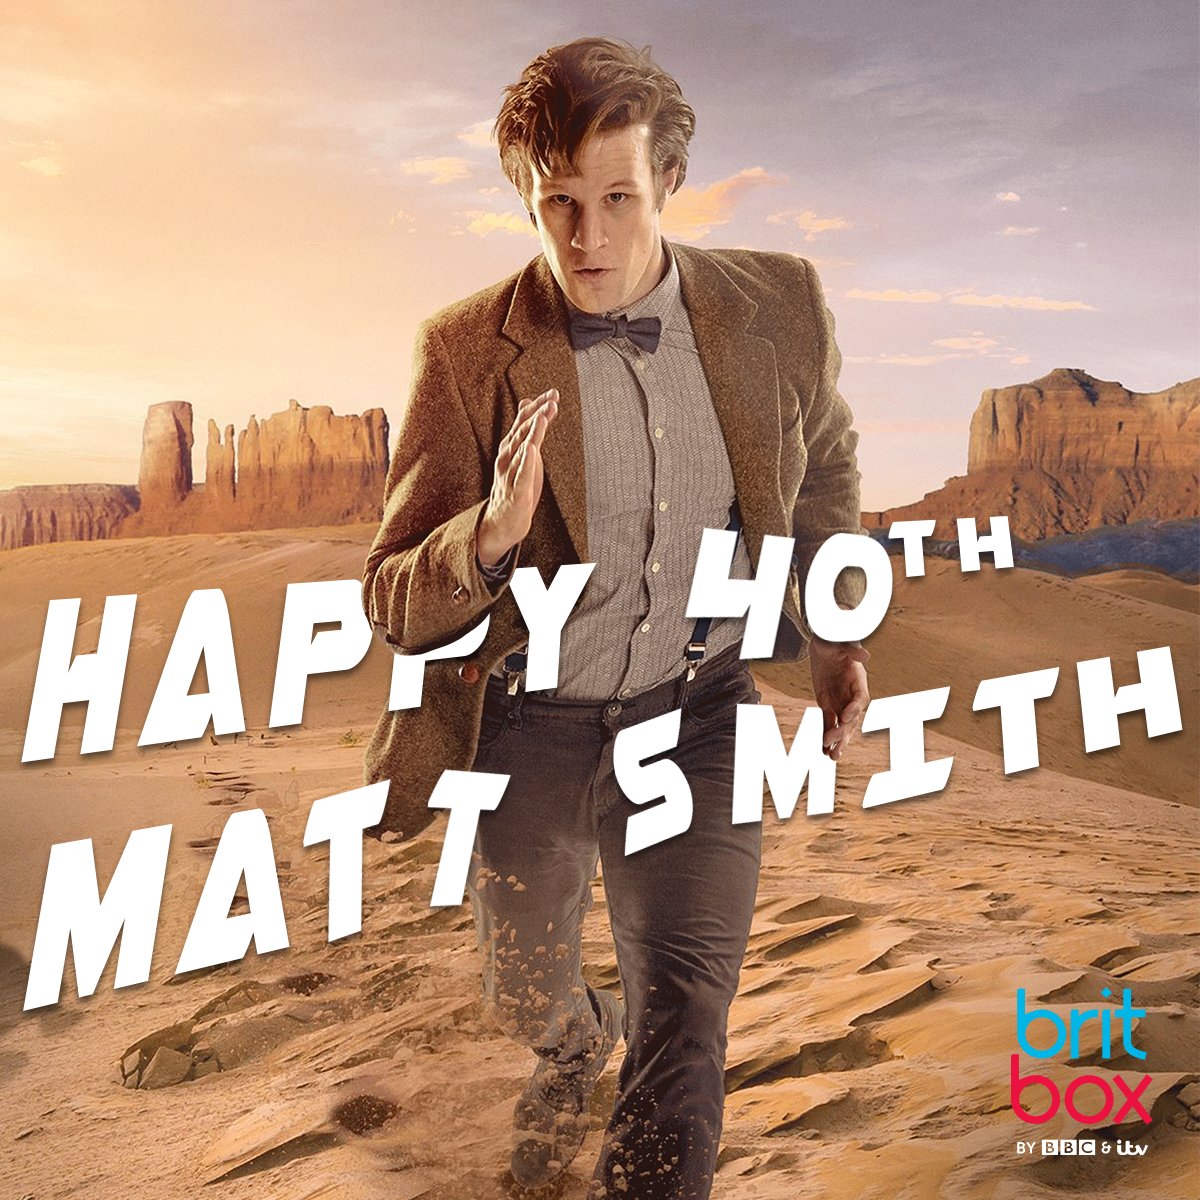 Dragons and Fire? More like Space and Time!
A very special happy birthday to Matt Smith! 